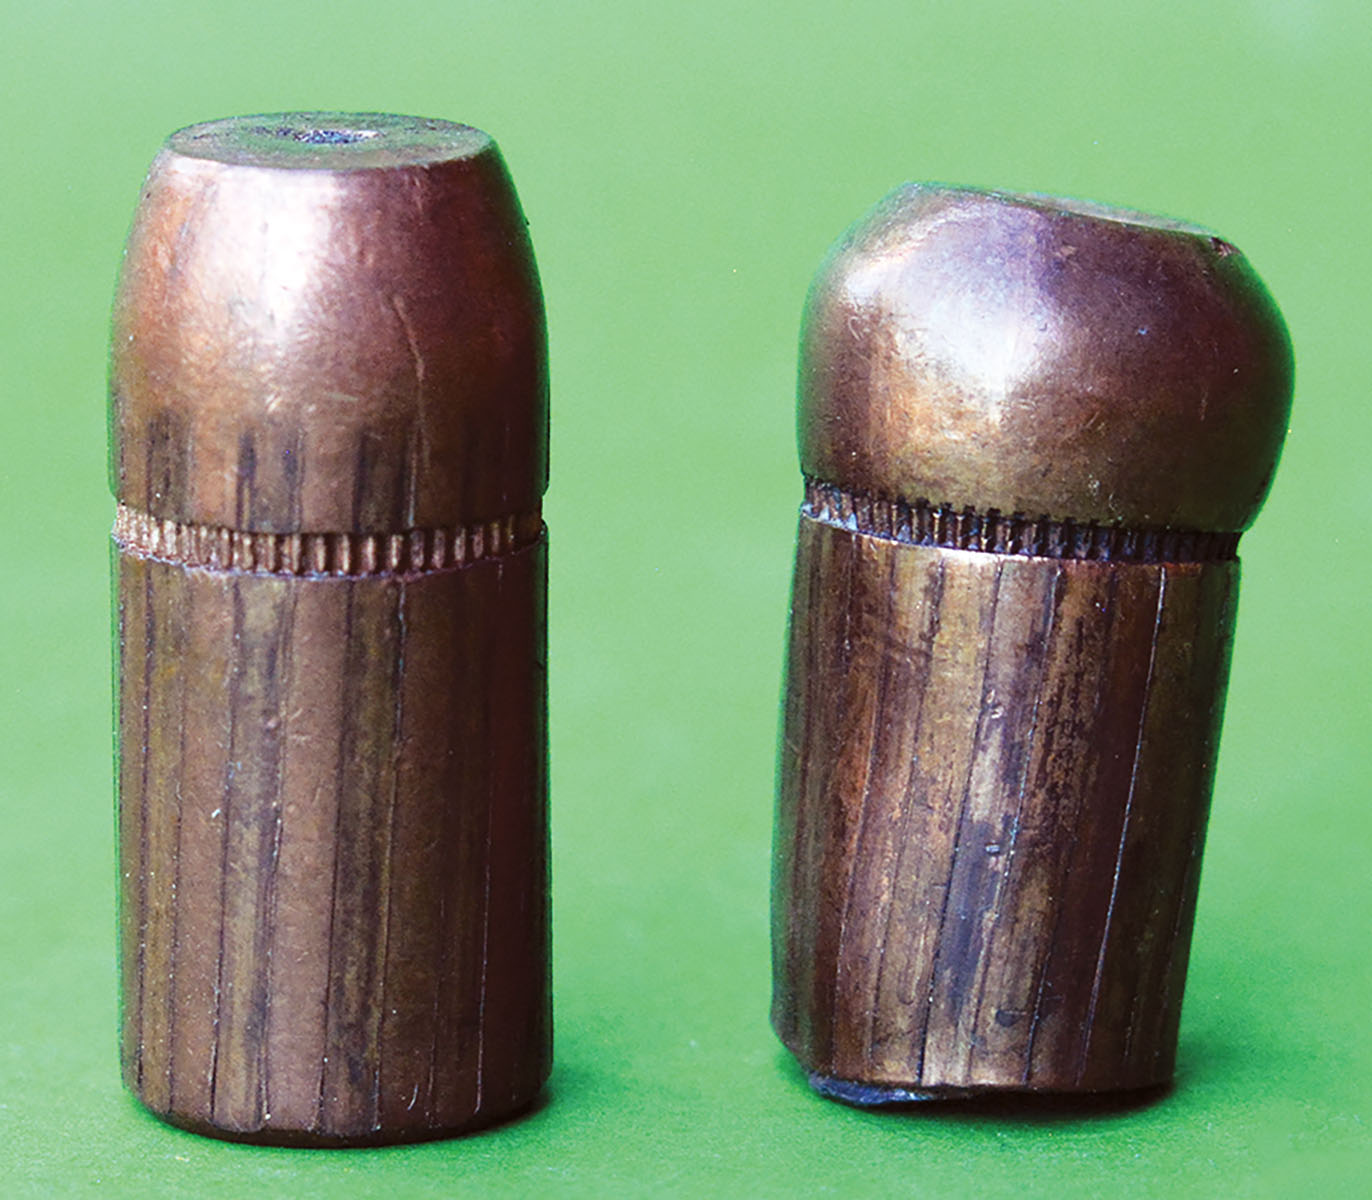 When loaded with solids, the 45-70 can offer deep penetration on heavy game, including Cape buffalo weighing in excess of 2,000 pounds. The 405-grain solid on the left penetrated from just below the tail, full-length through the body and was recovered in the brisket, while the bullet on the right penetrated both shoulders of two different buffalo.